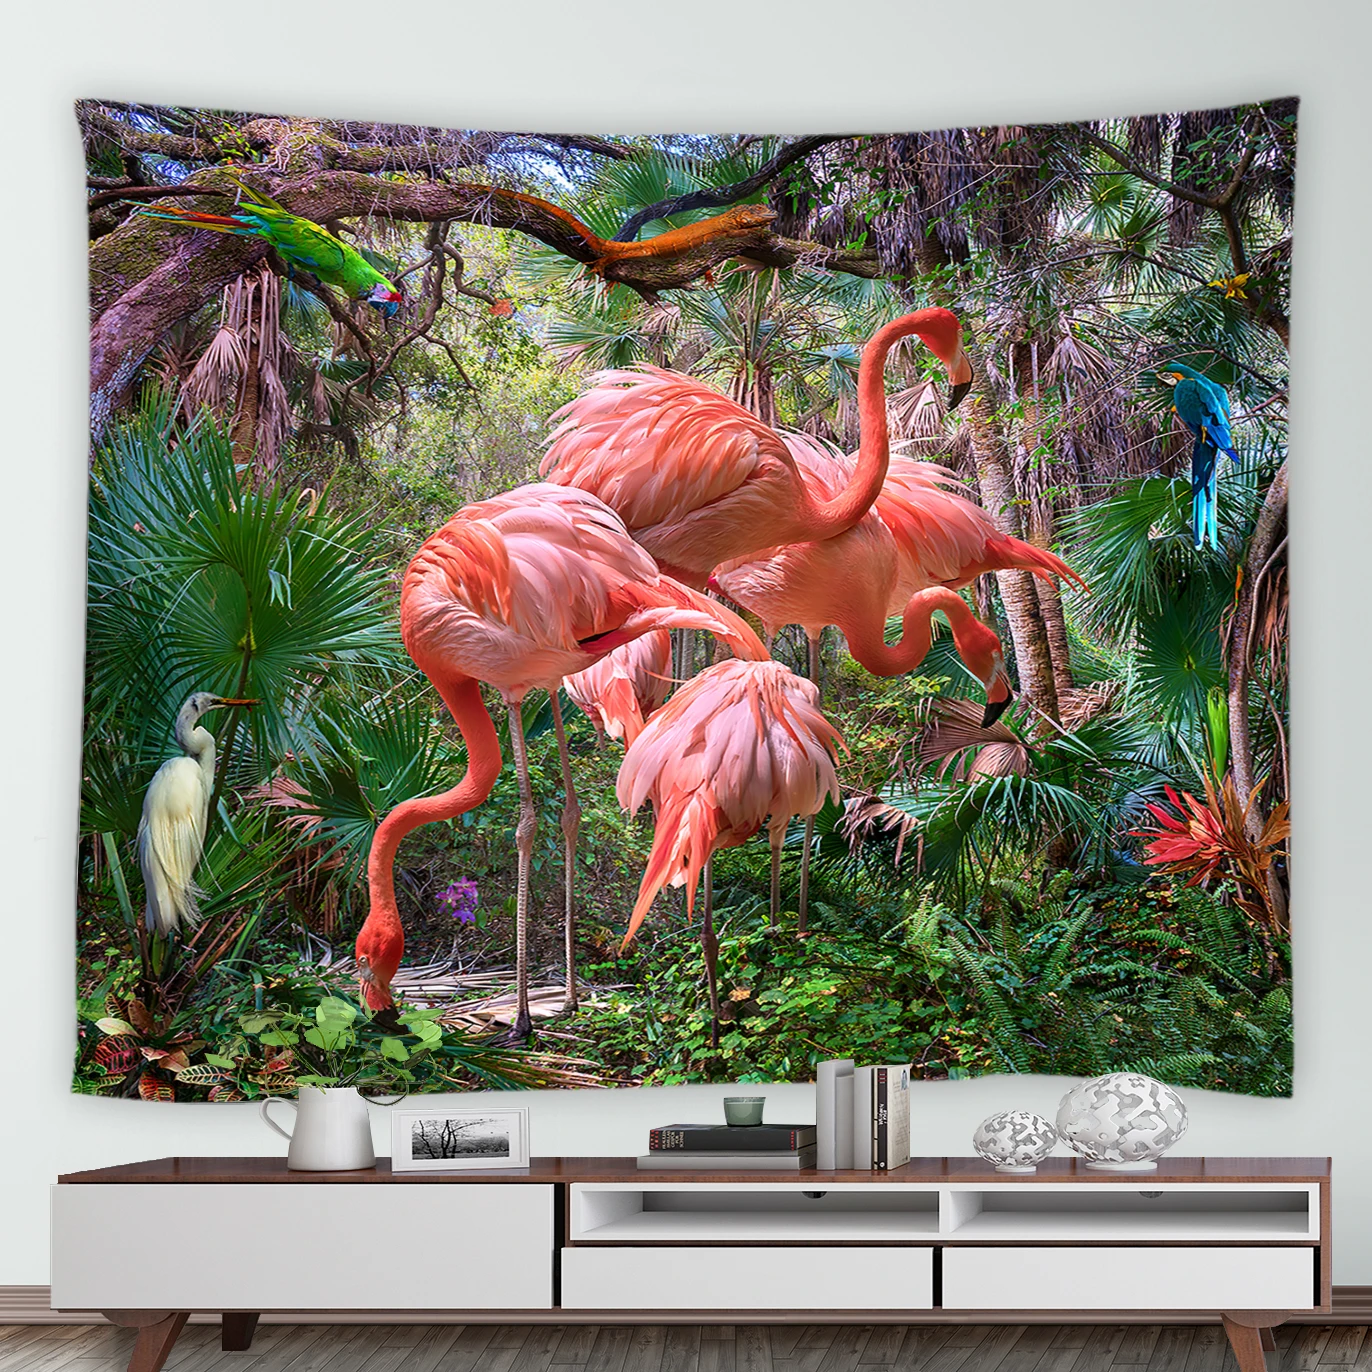 

Tropical Jungle Red Flamingo Tapestry Forest Green Plants Palm Tree Parrot Birds Tapestries Home Dorm Mural Wall Hanging Blanket